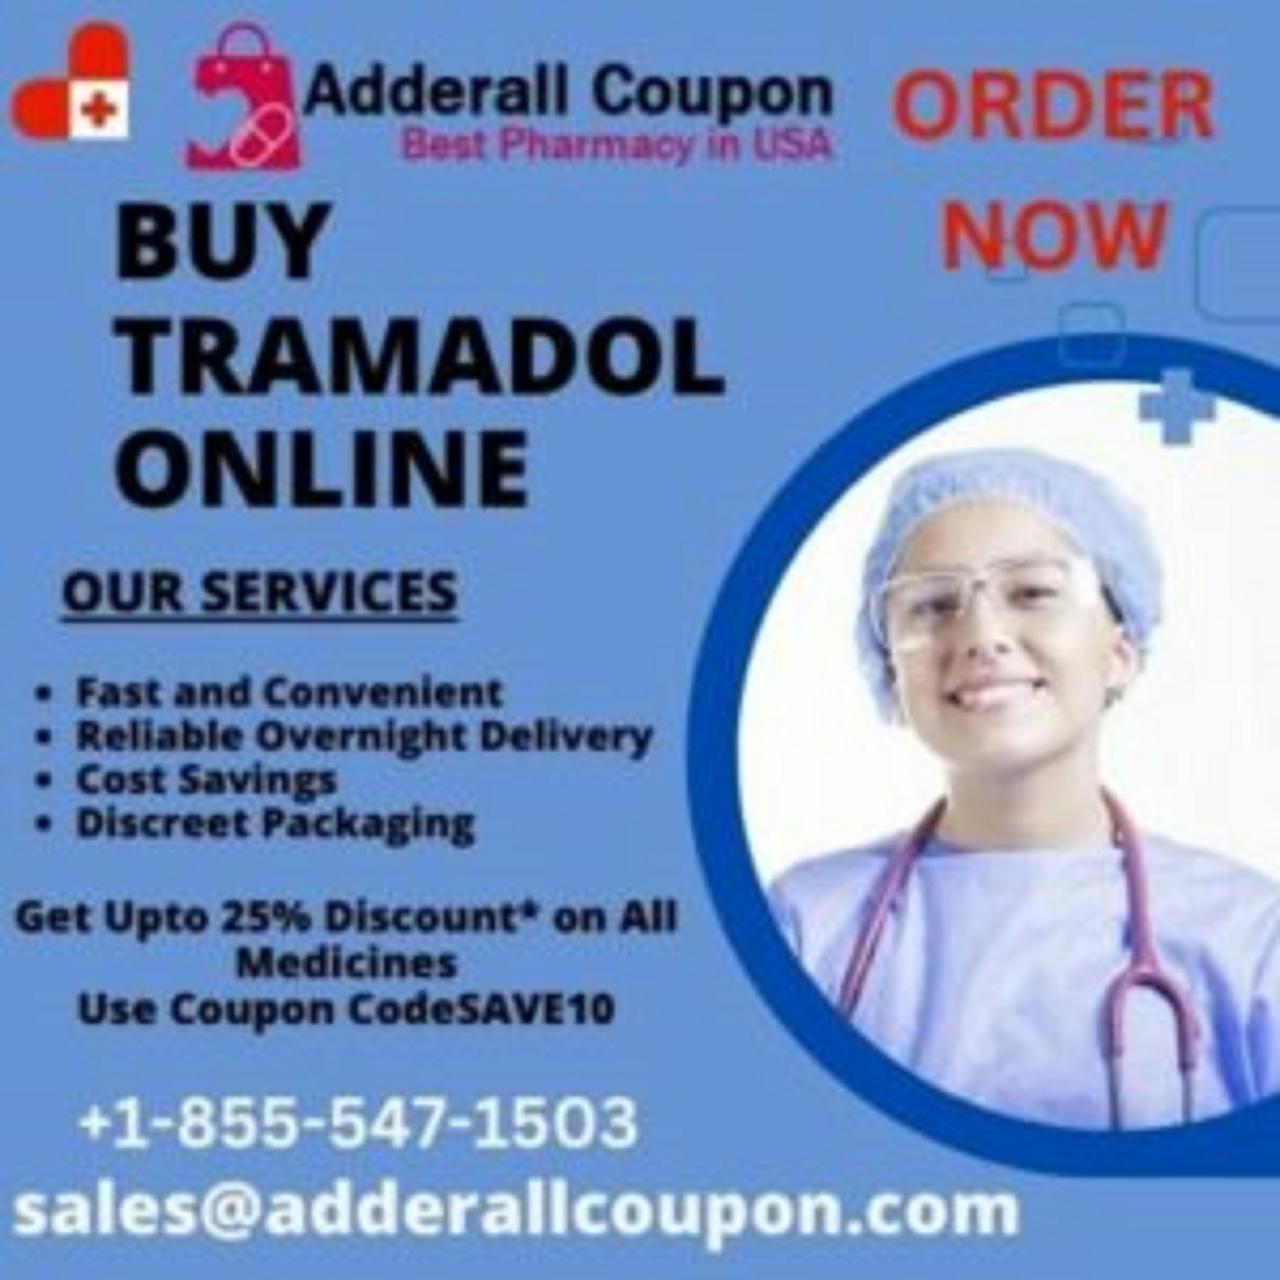 ORDER TRAMADOL ONLINE OVERNIGHT DELIVERY IN USA